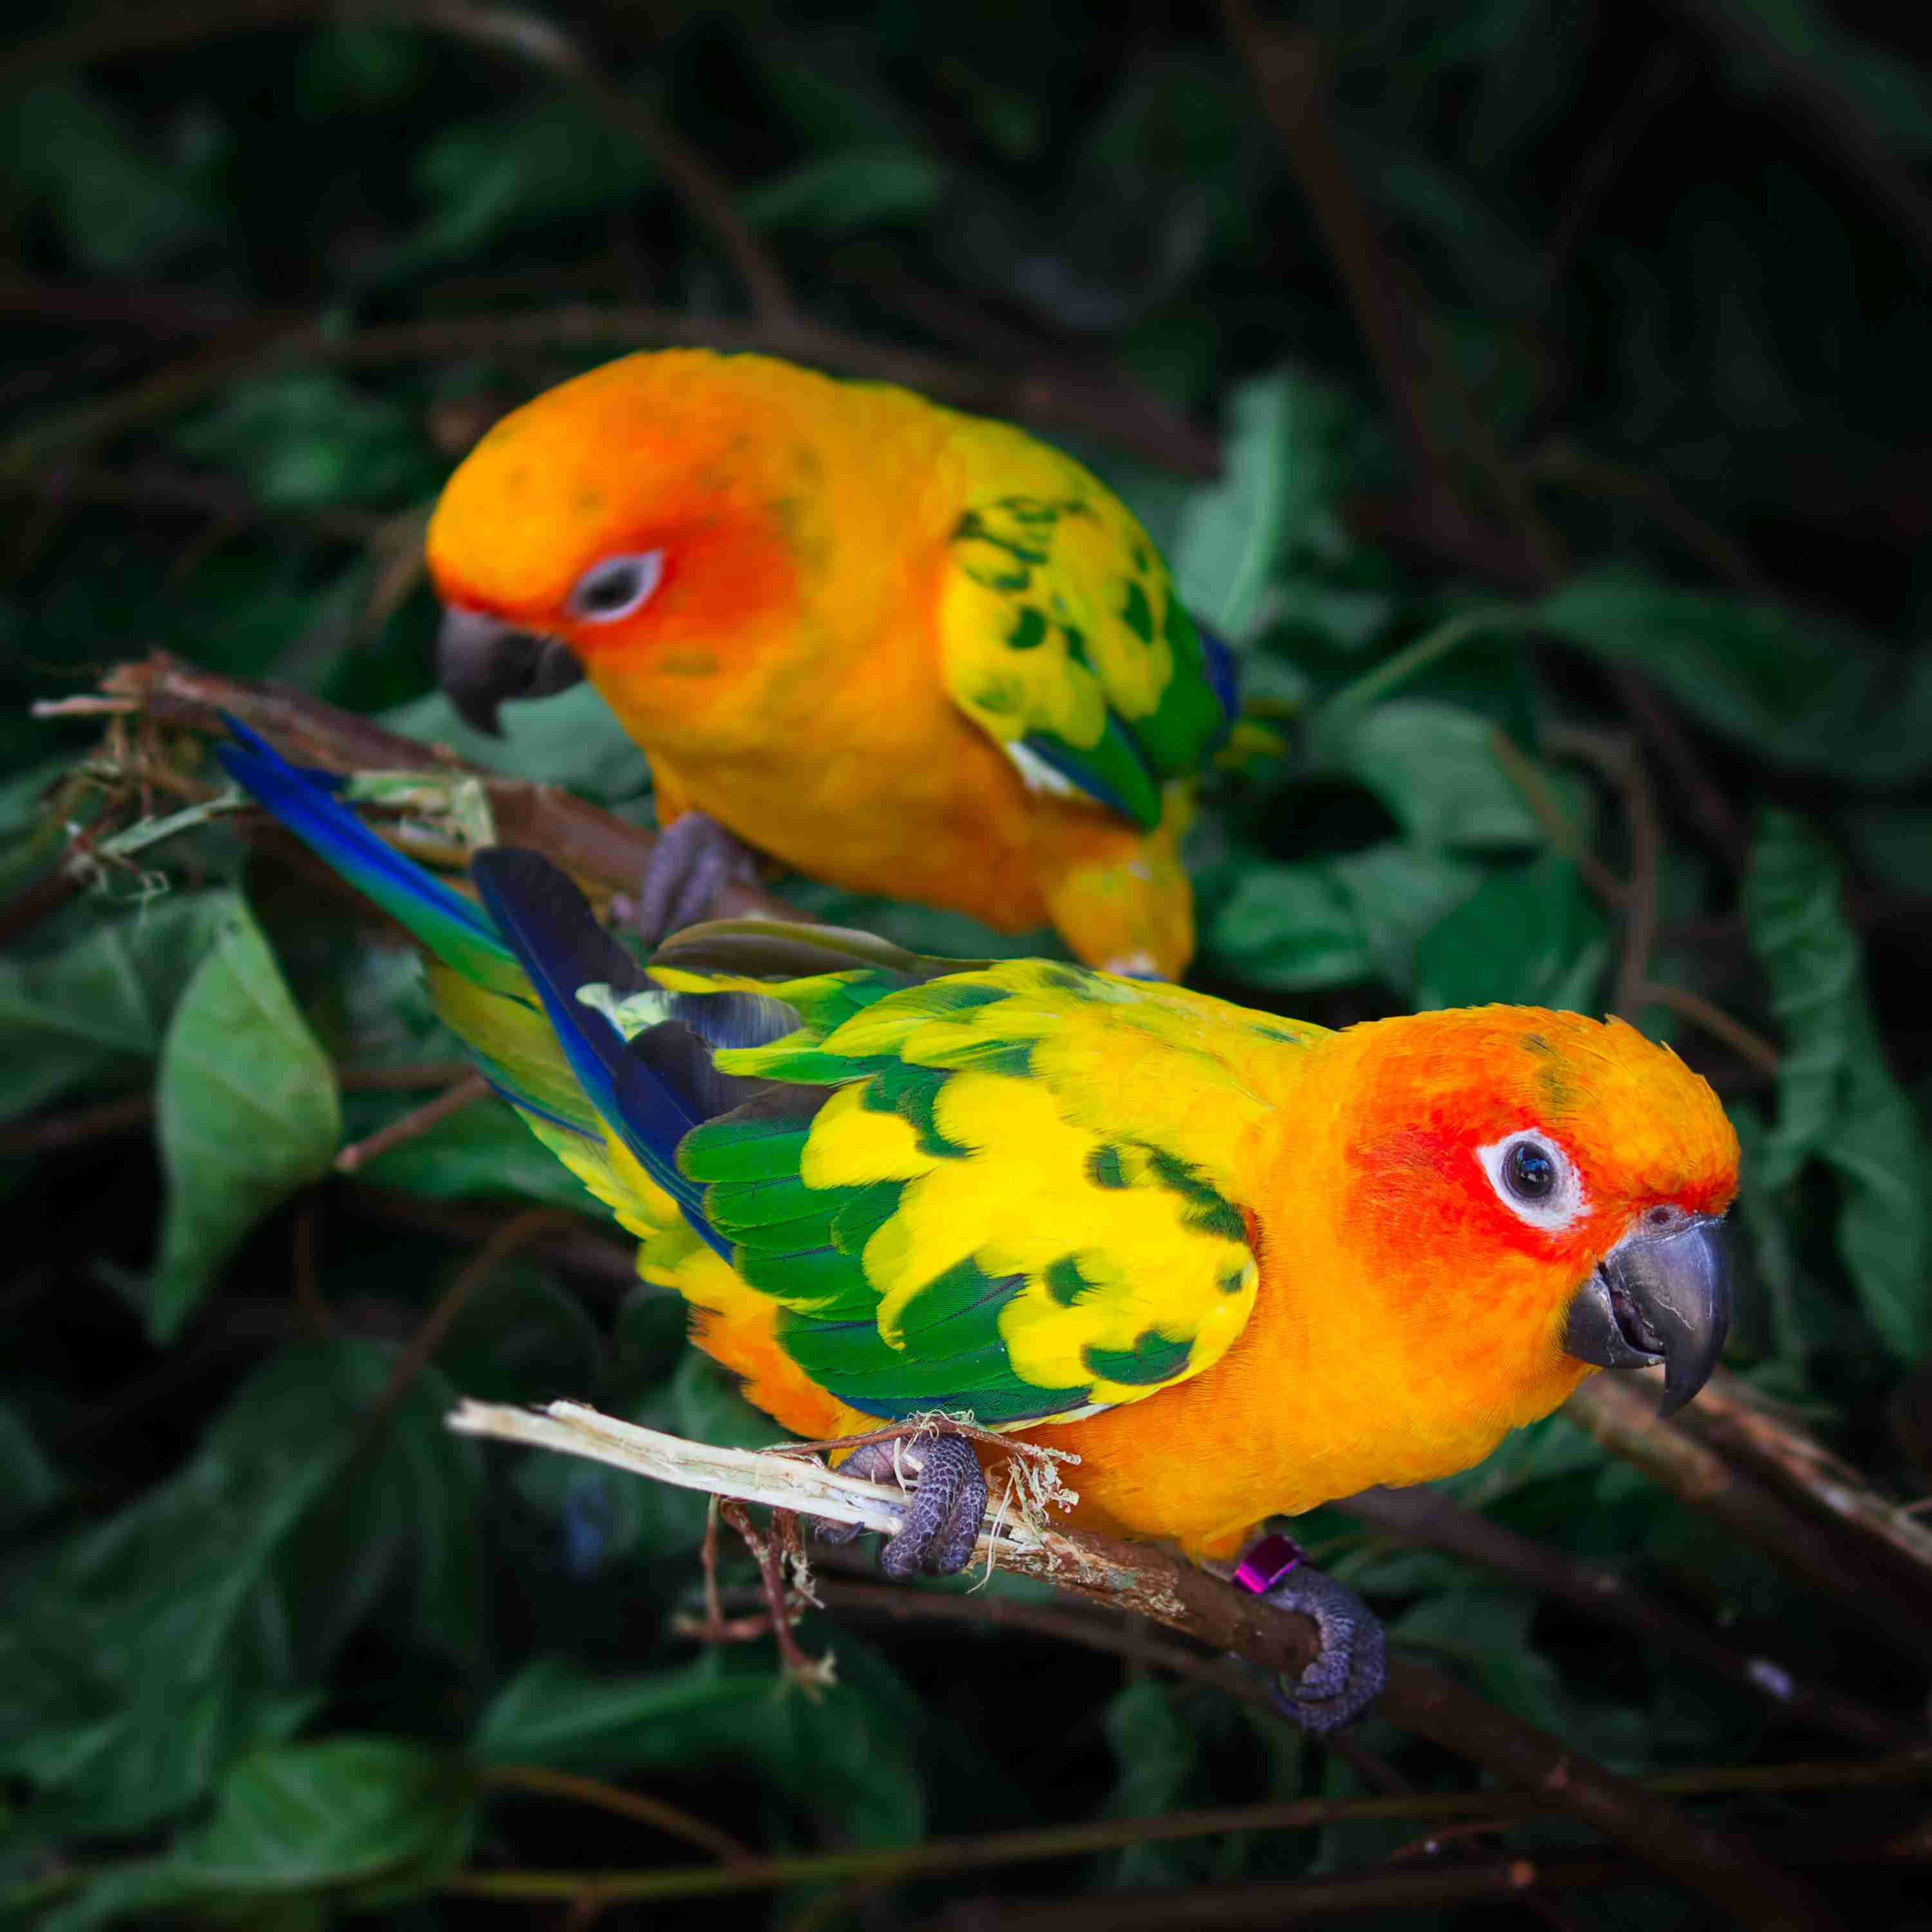 Two conures in a tree